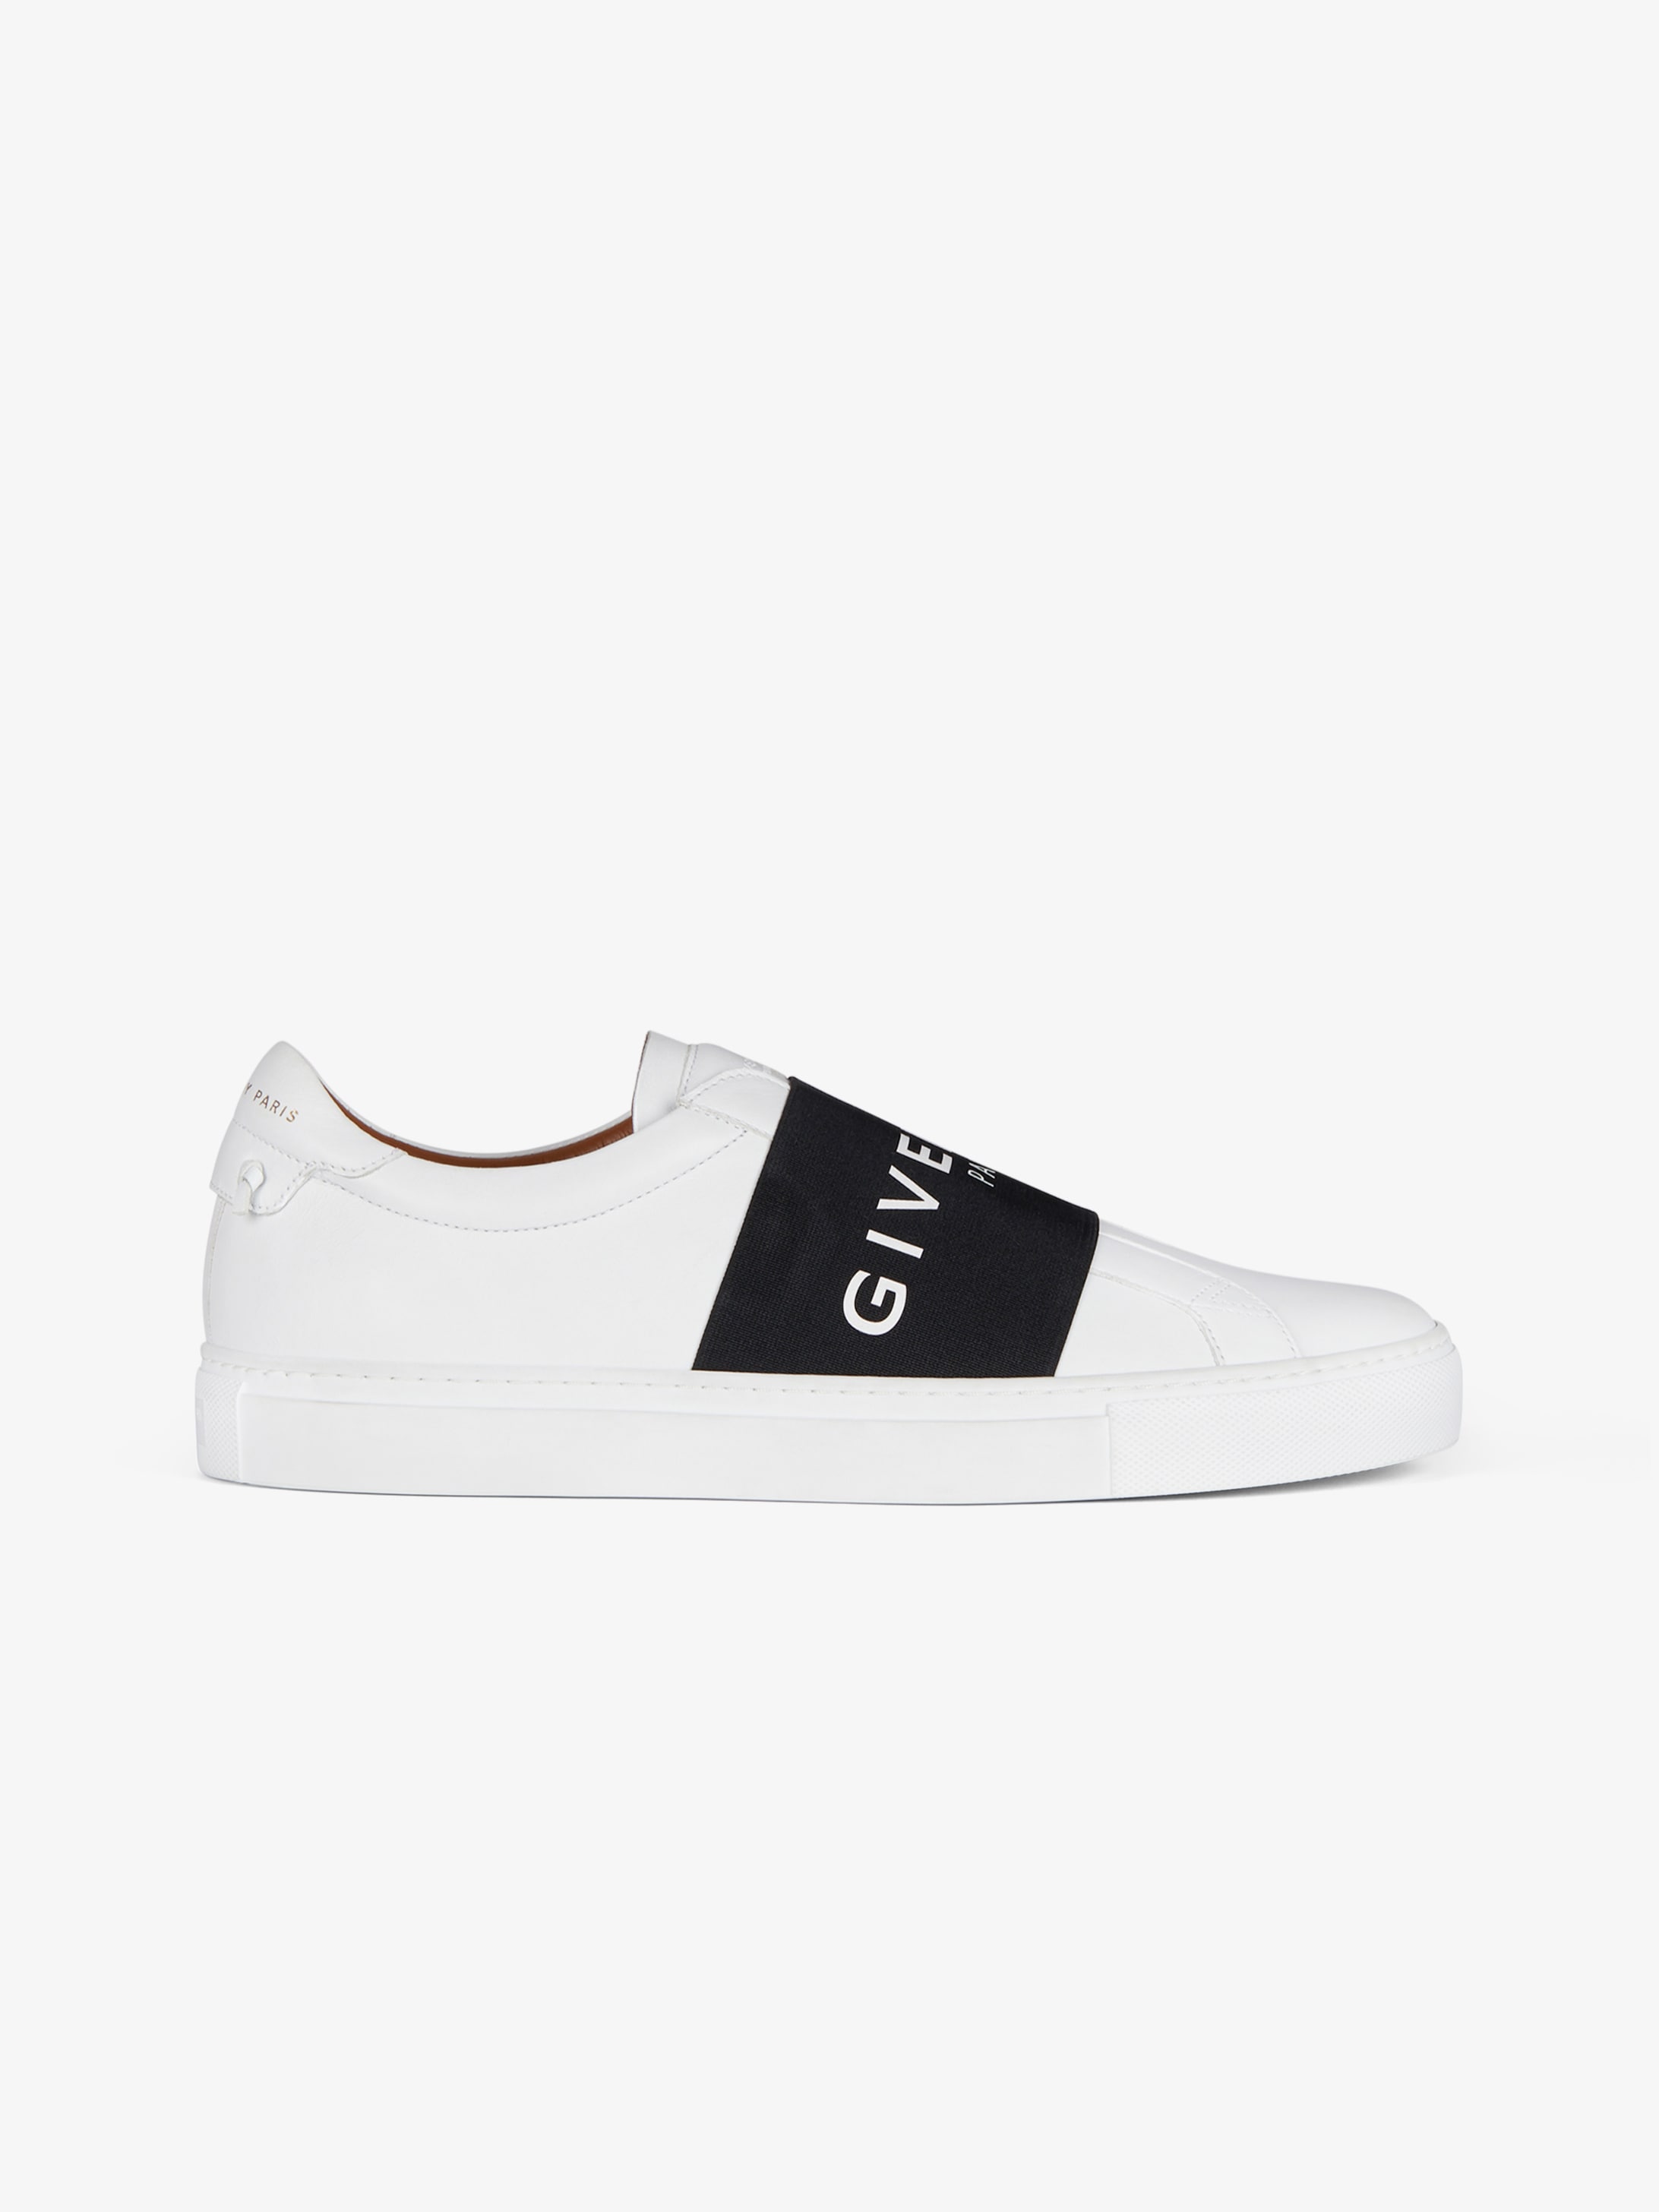 GIVENCHY PARIS strap sneakers in 